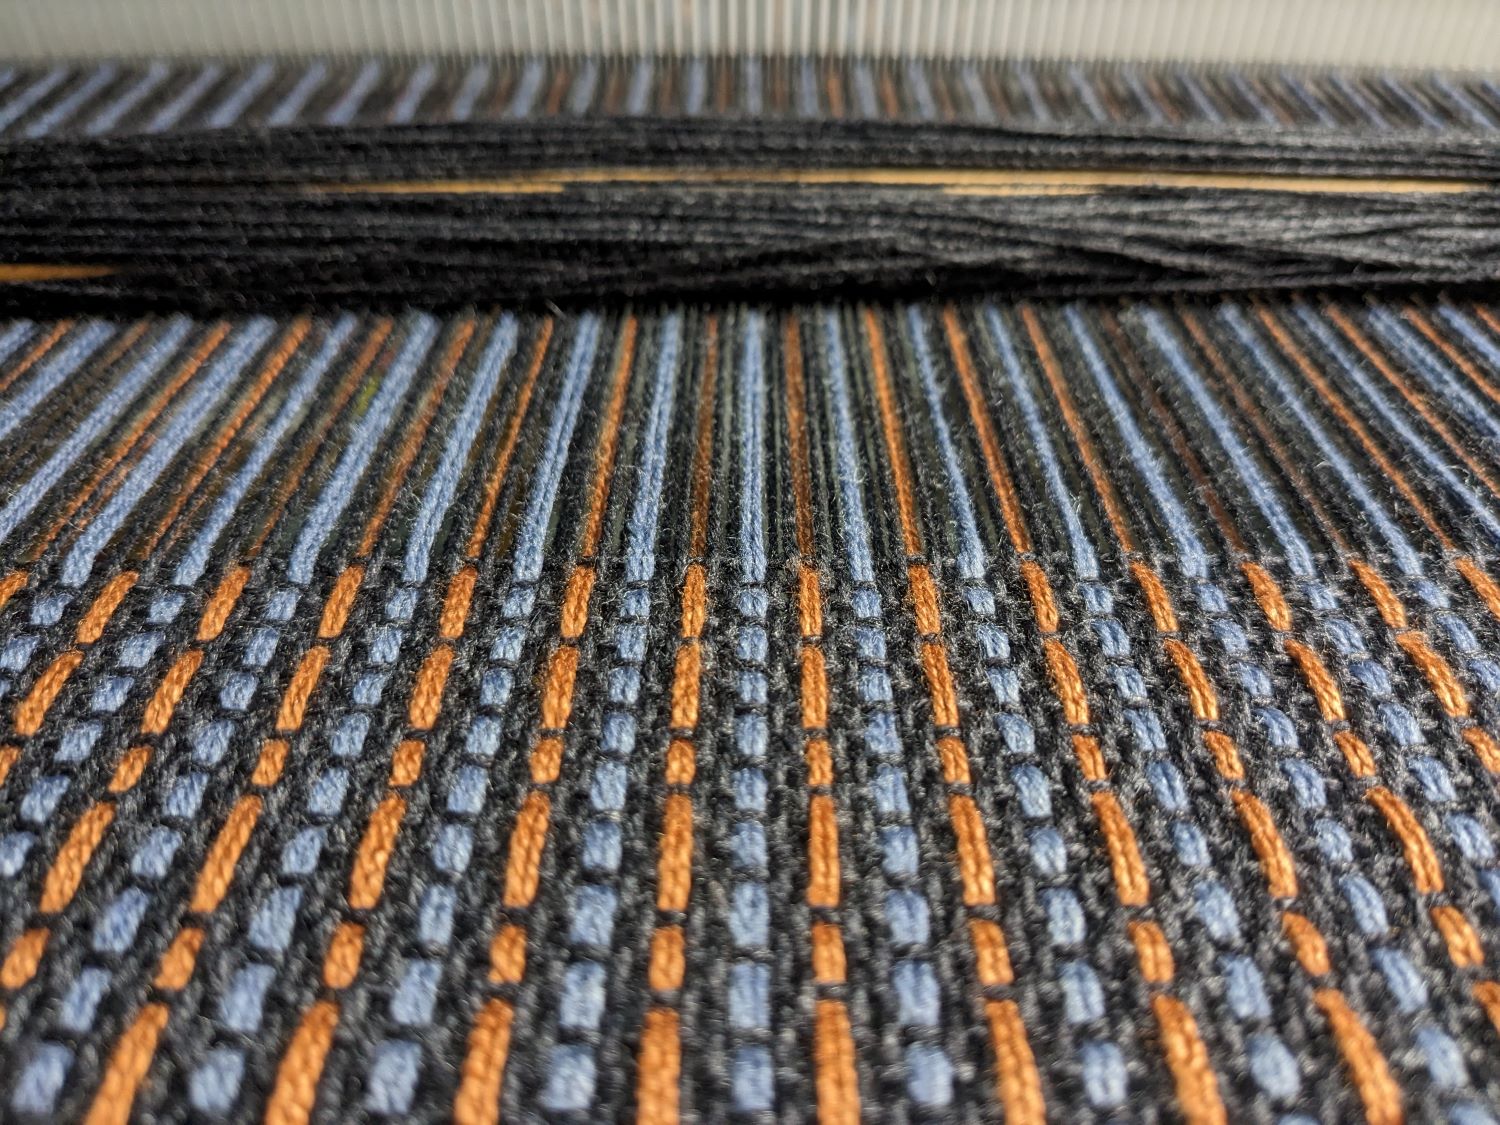 A photo of the design on the loom